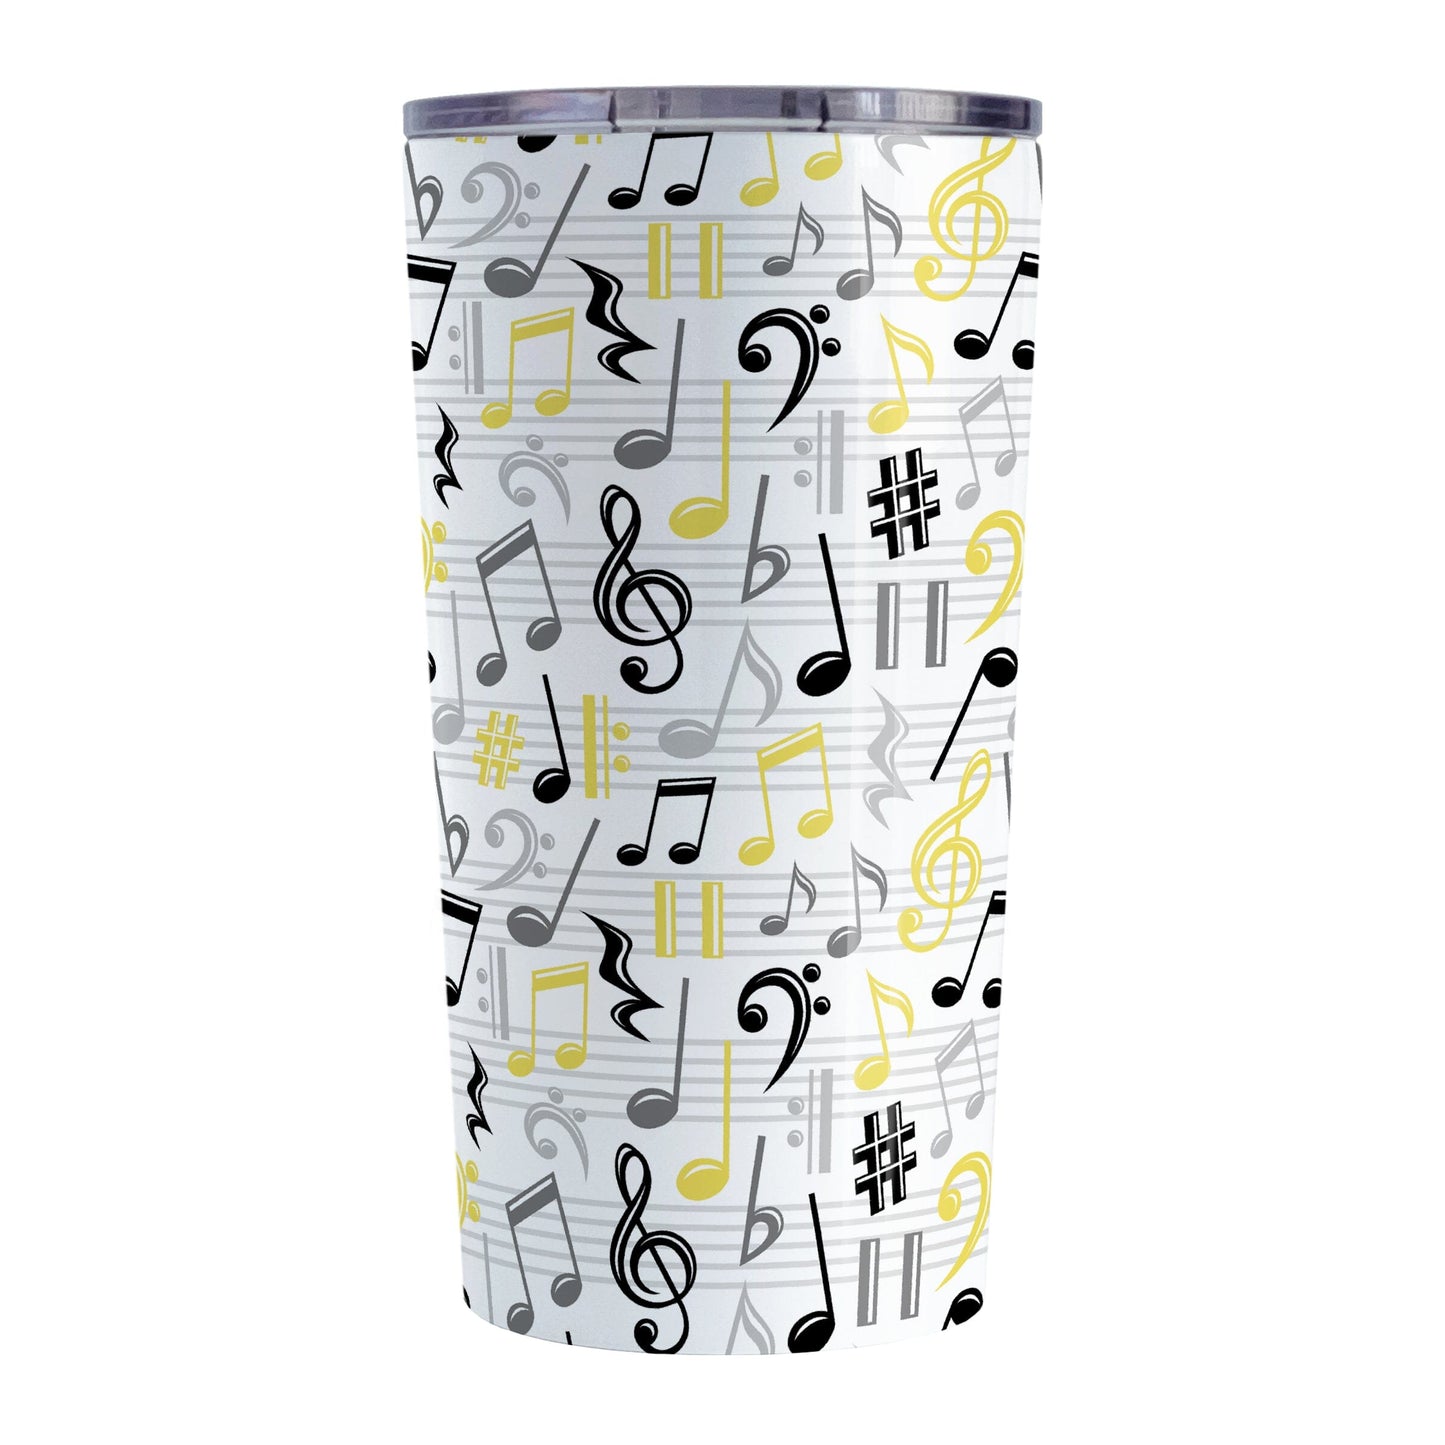 Yellow Music Notes Pattern Tumbler Cup (20oz) at Amy's Coffee Mugs. A stainless steel tumbler cup designed with music notes and symbols in yellow, black, and gray in a pattern that wraps around the cup.